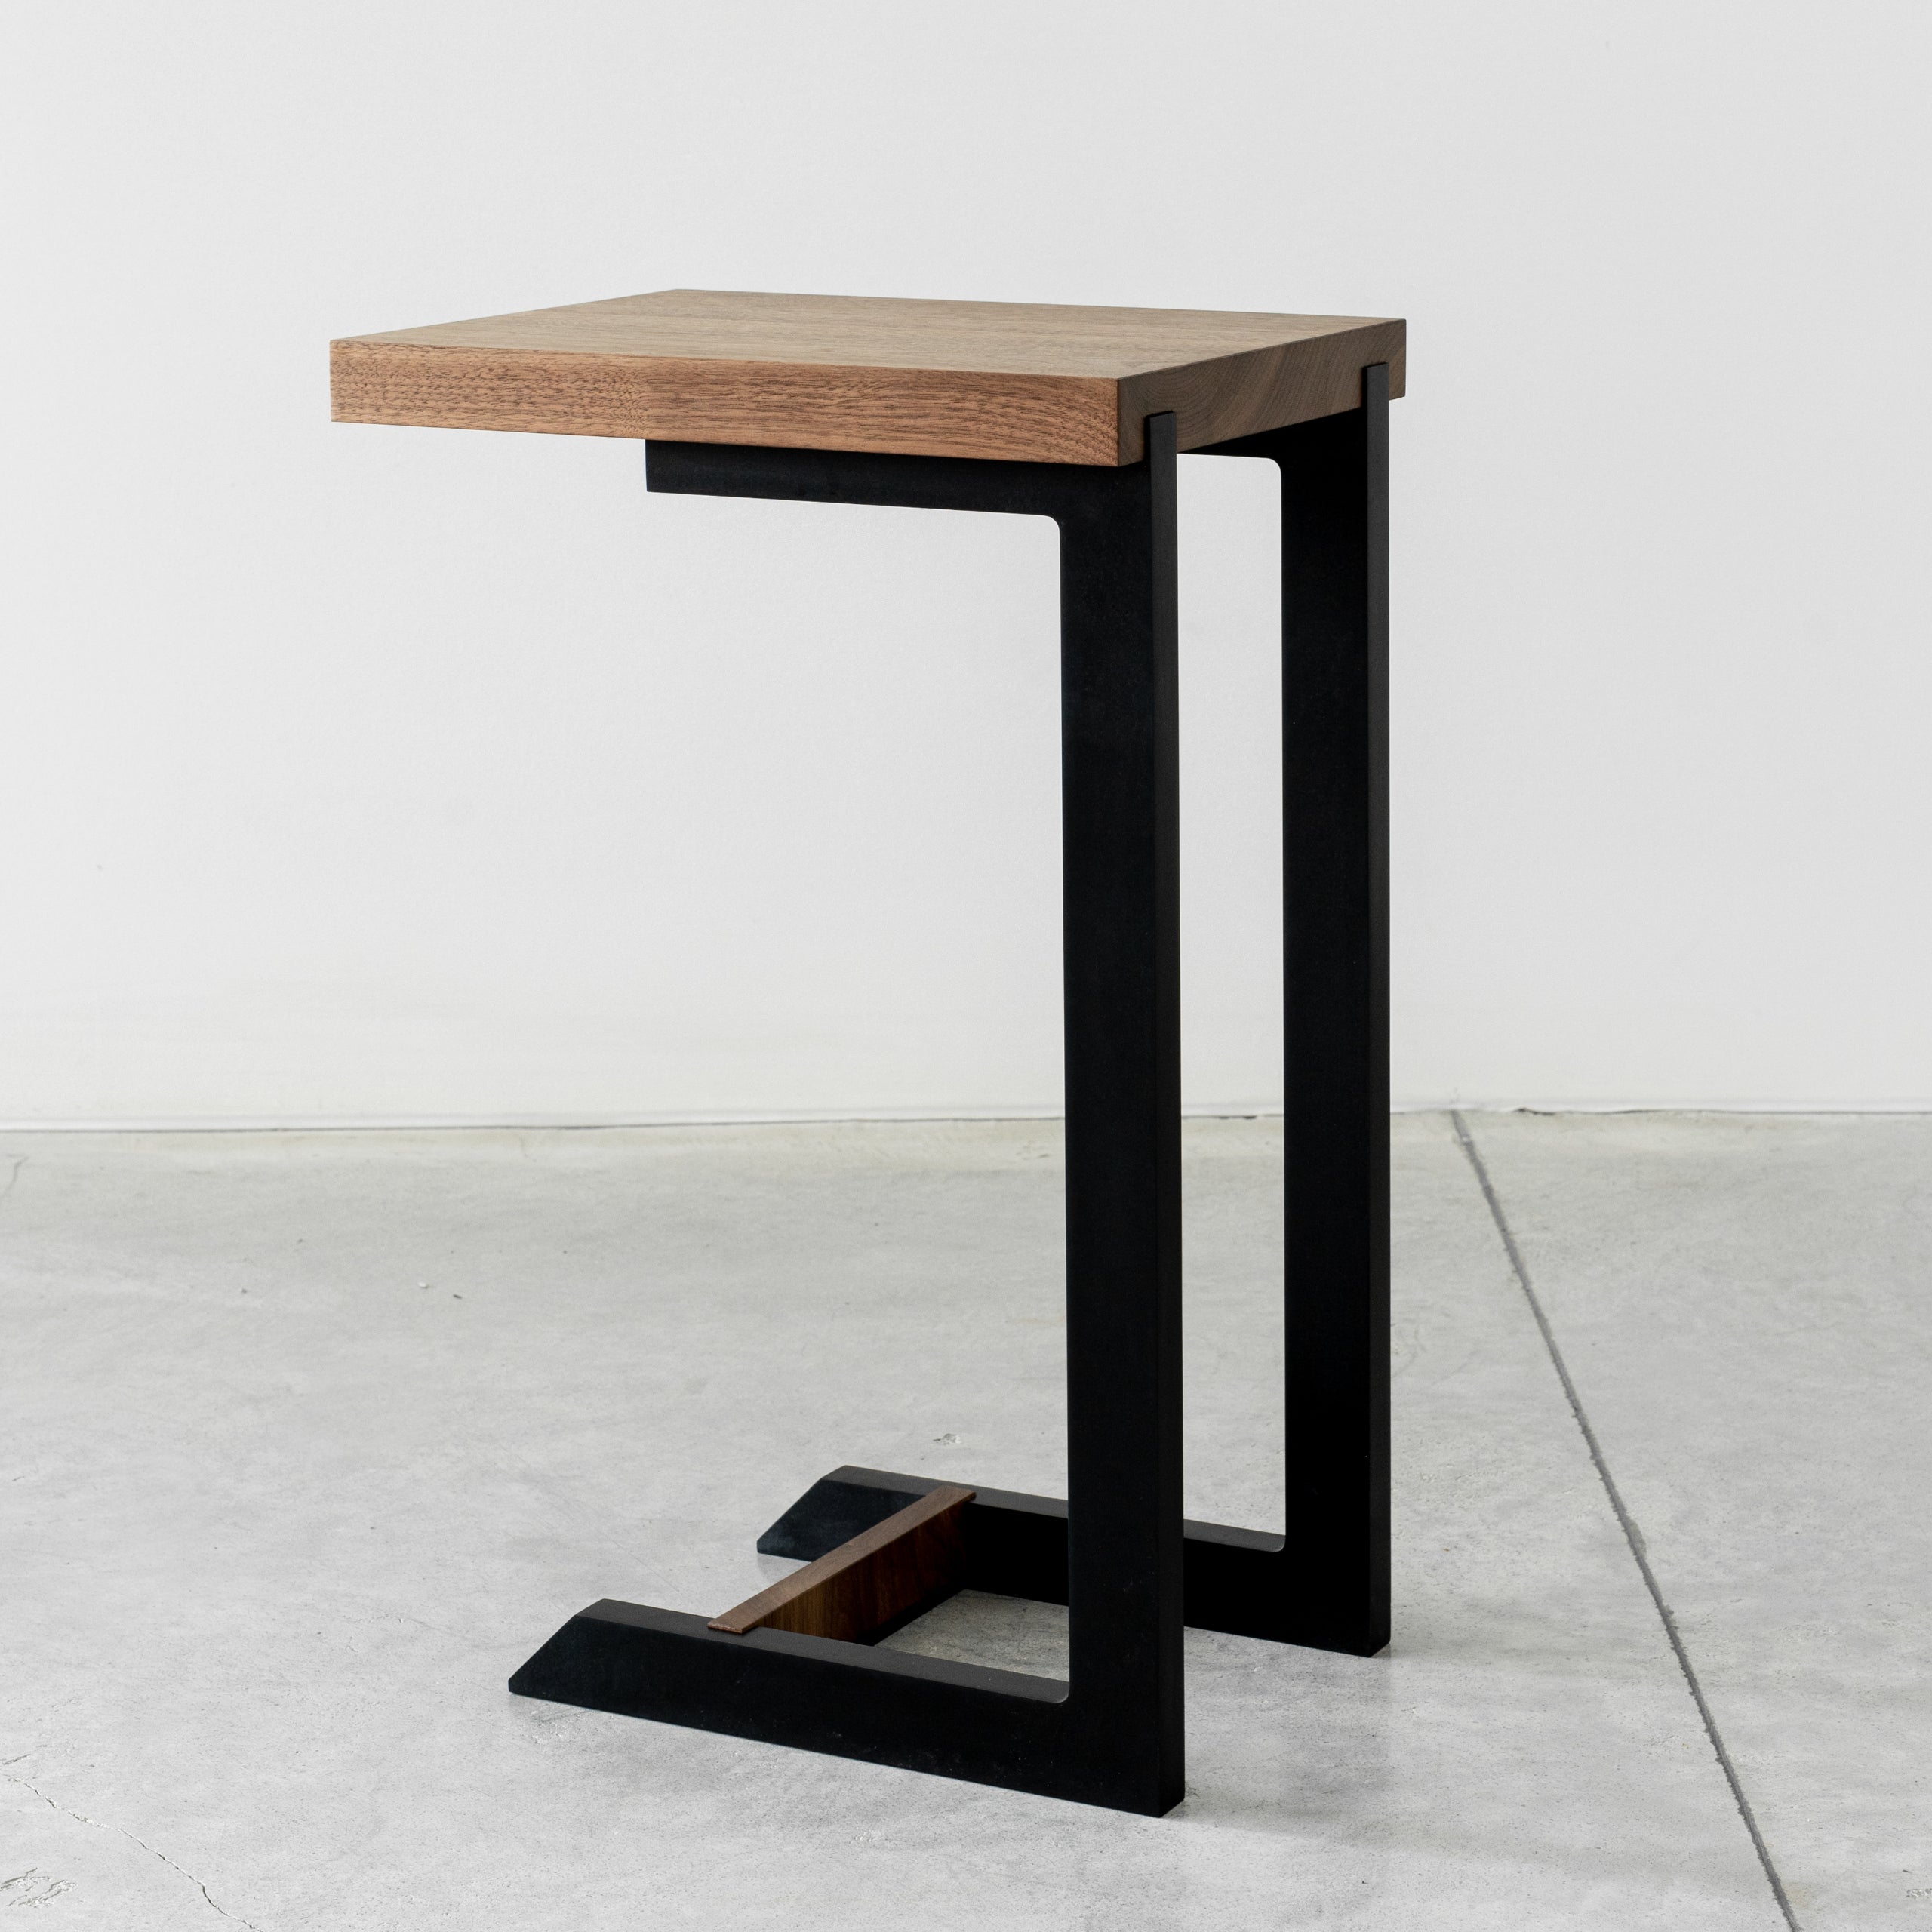 An end table that is always there when you need her, pulled up to a sofa for a cocktail or cup of tea, much like a best friend. The Clair Black end table was designed in a dramatic silhouette of matte black using recycled paper composite, shown in a